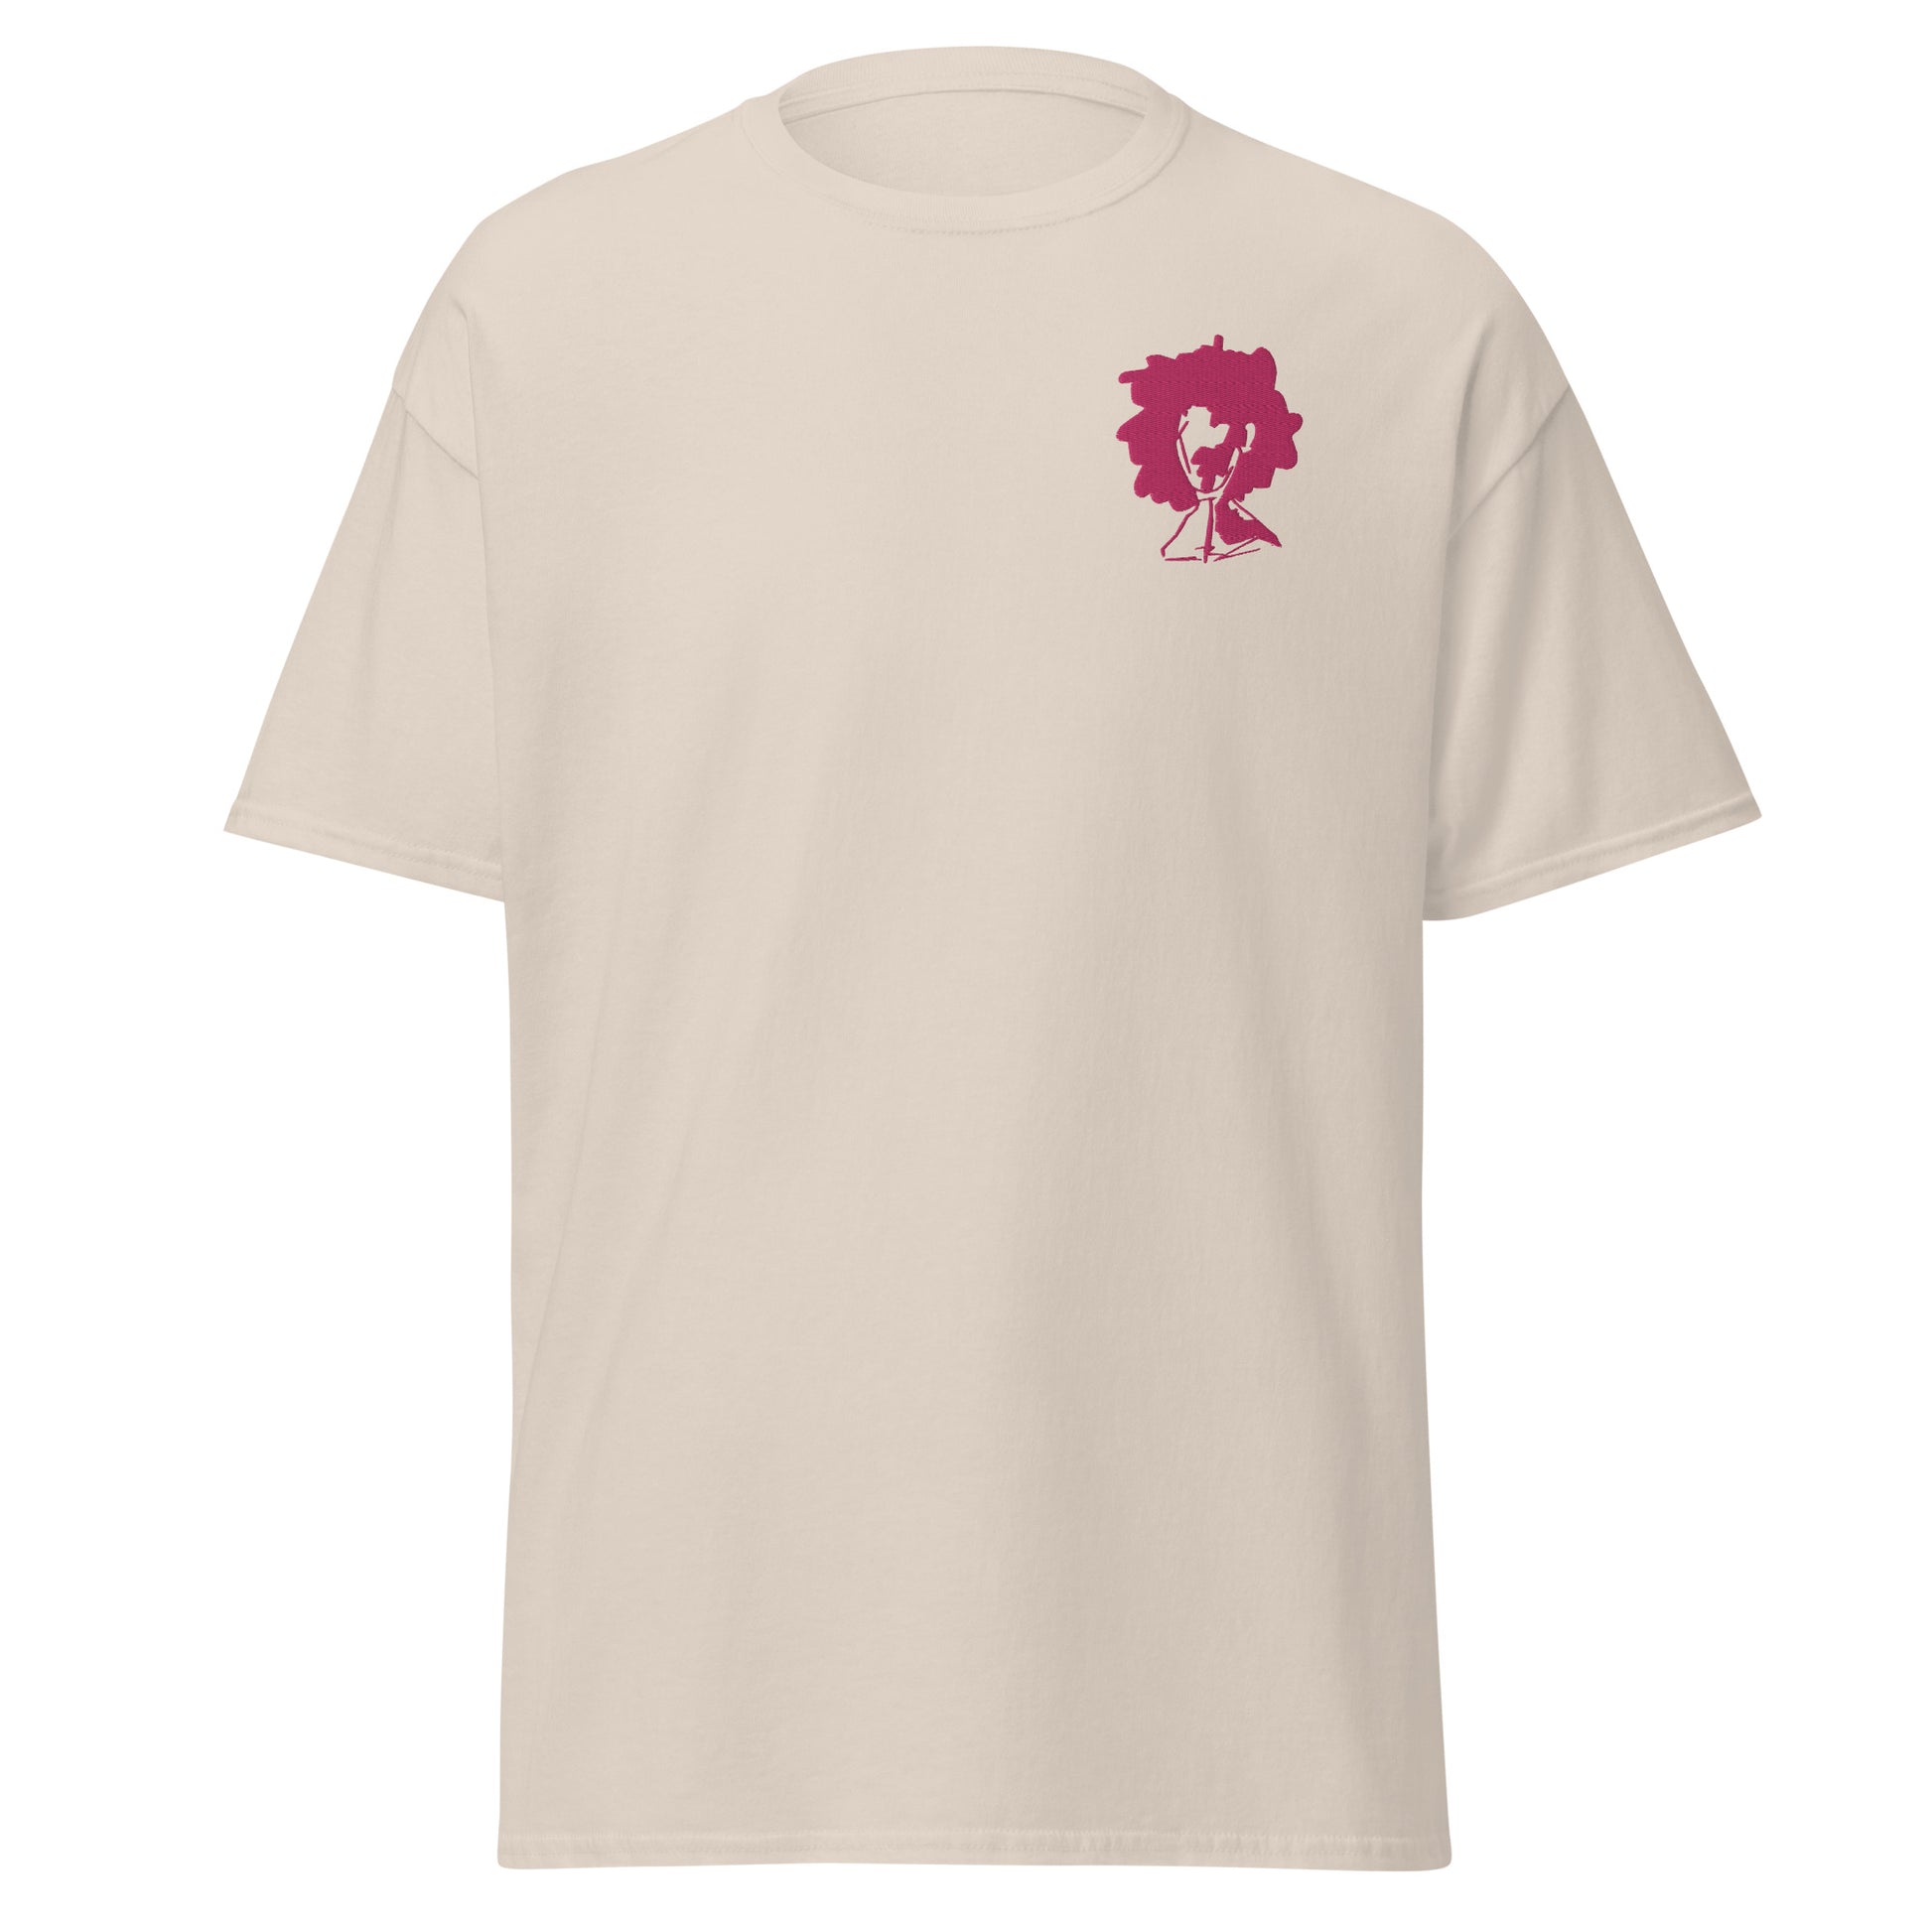 FREE Embroidered T-Shirt - ParrisPieces